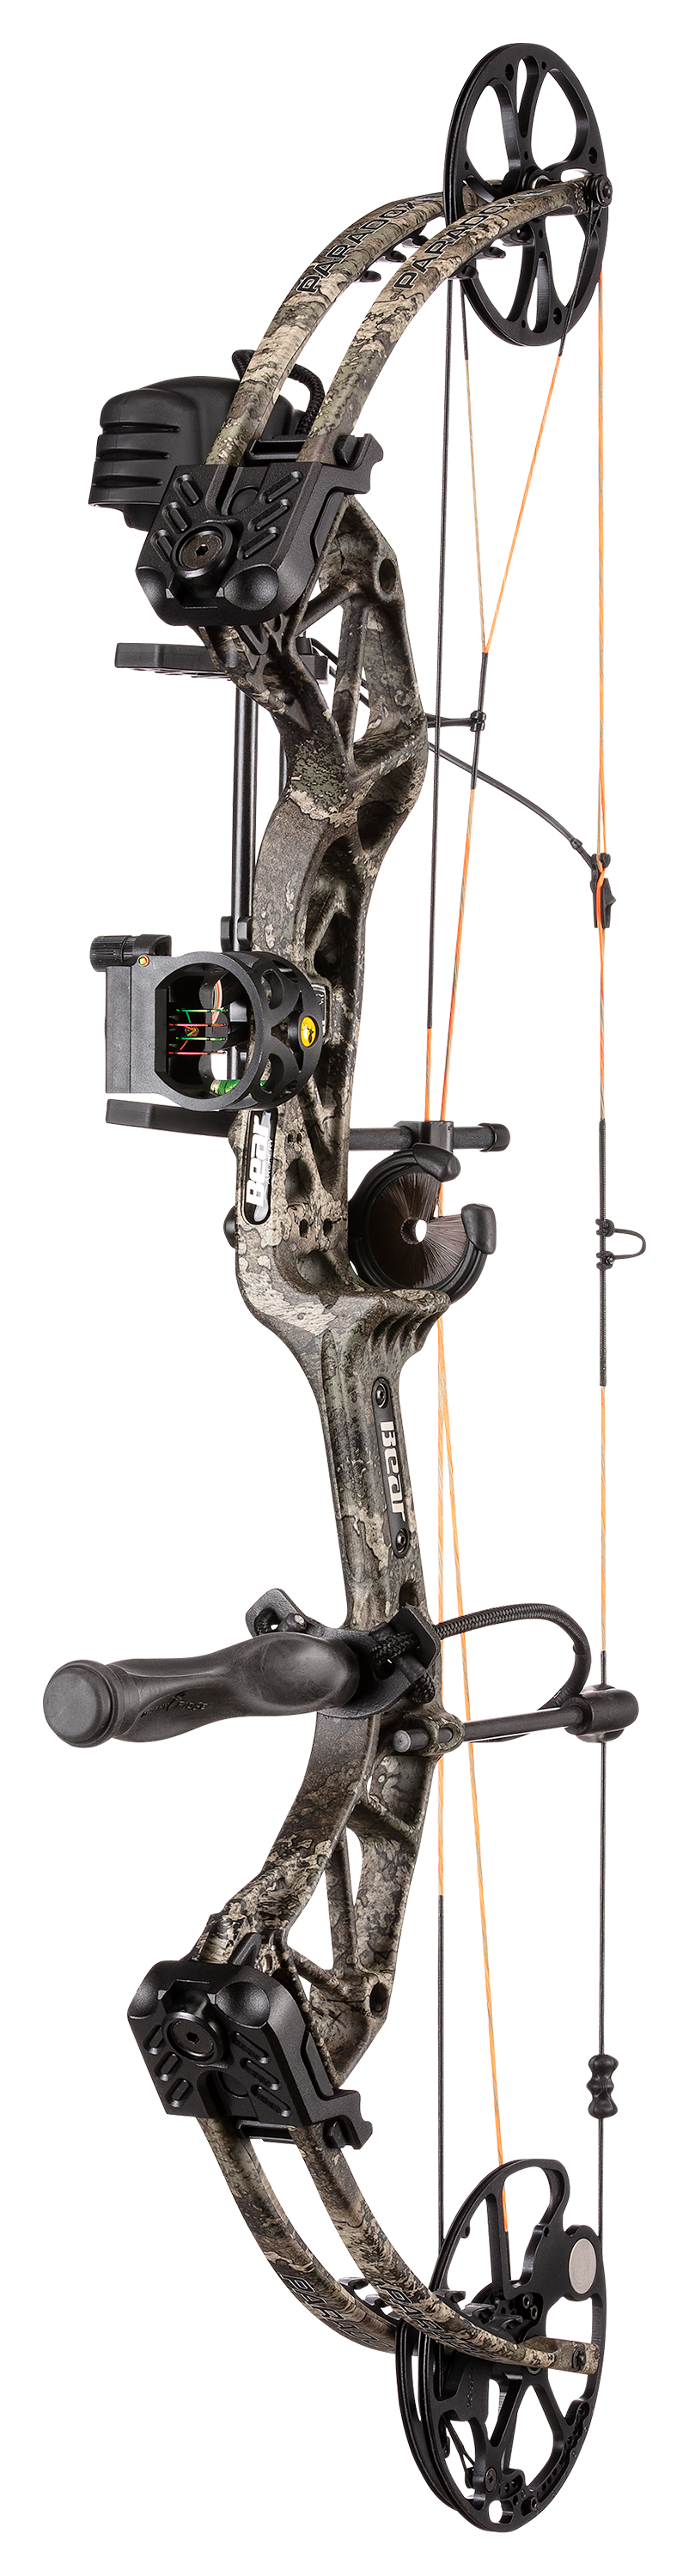 Bear Archery Paradox RTH Compound Bow Package - 45-60 lbs - Left Hand